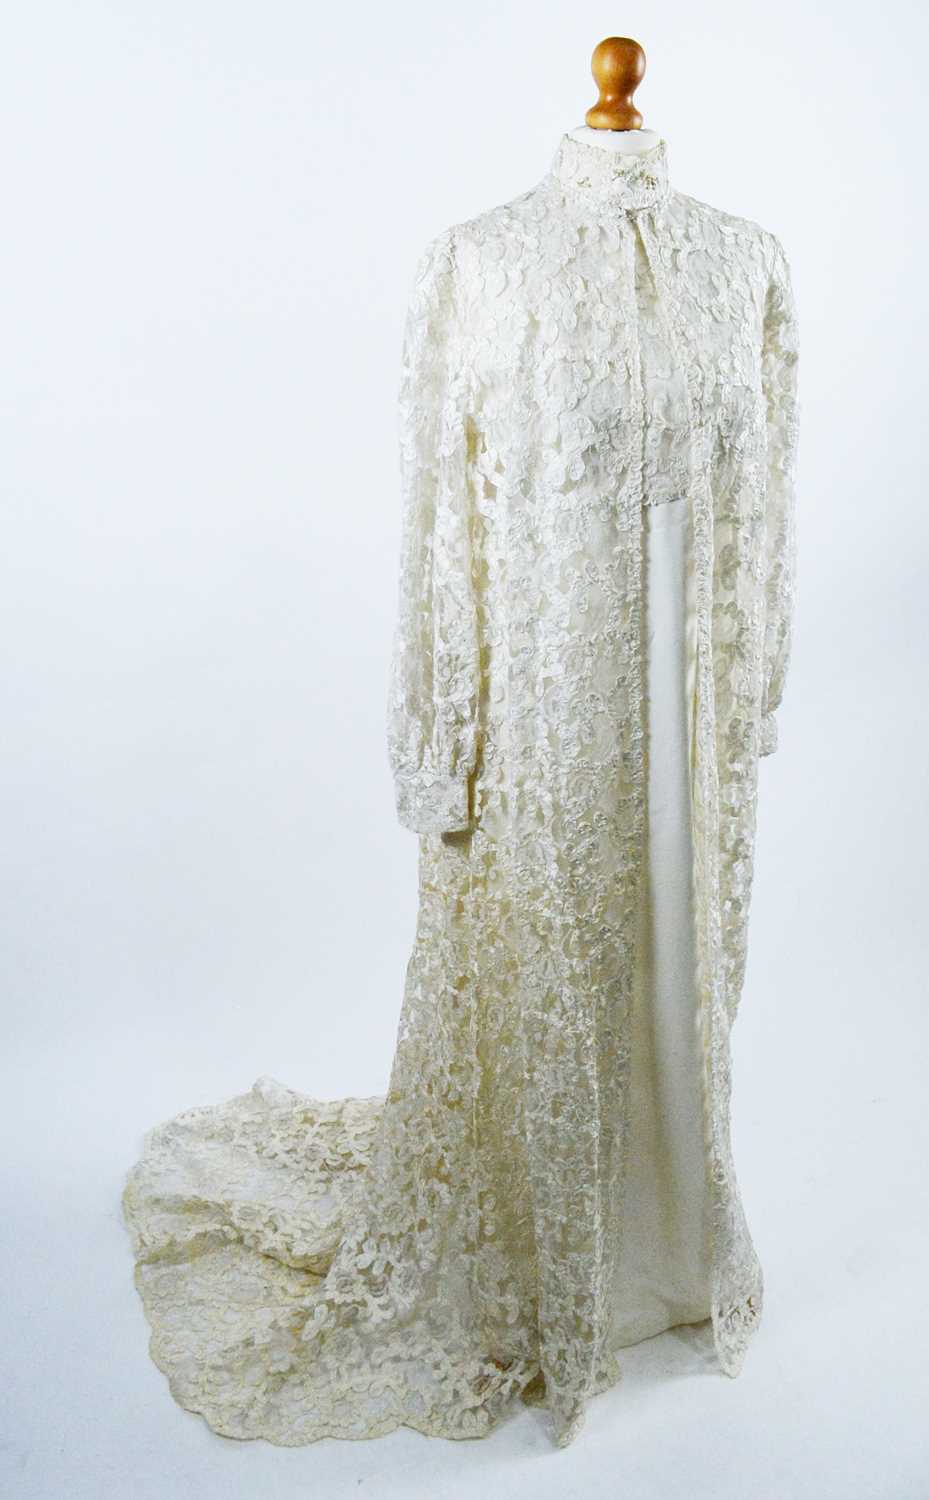 1960s two-piece champagne satin and lace wedding dress - Image 4 of 5